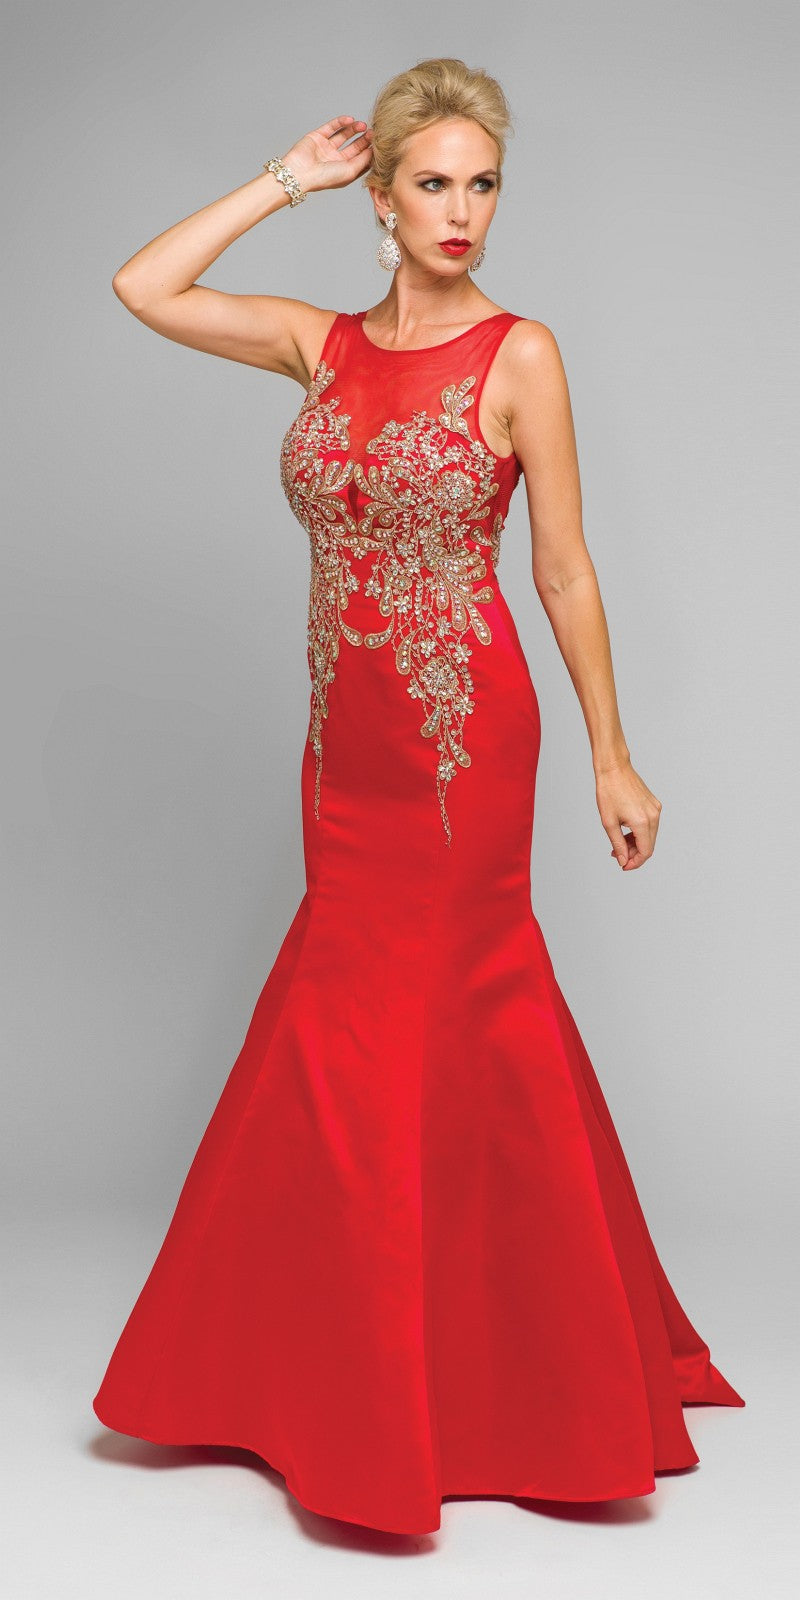 Juliet 623 Red Trumpet Style Prom Gown with Applique Beading